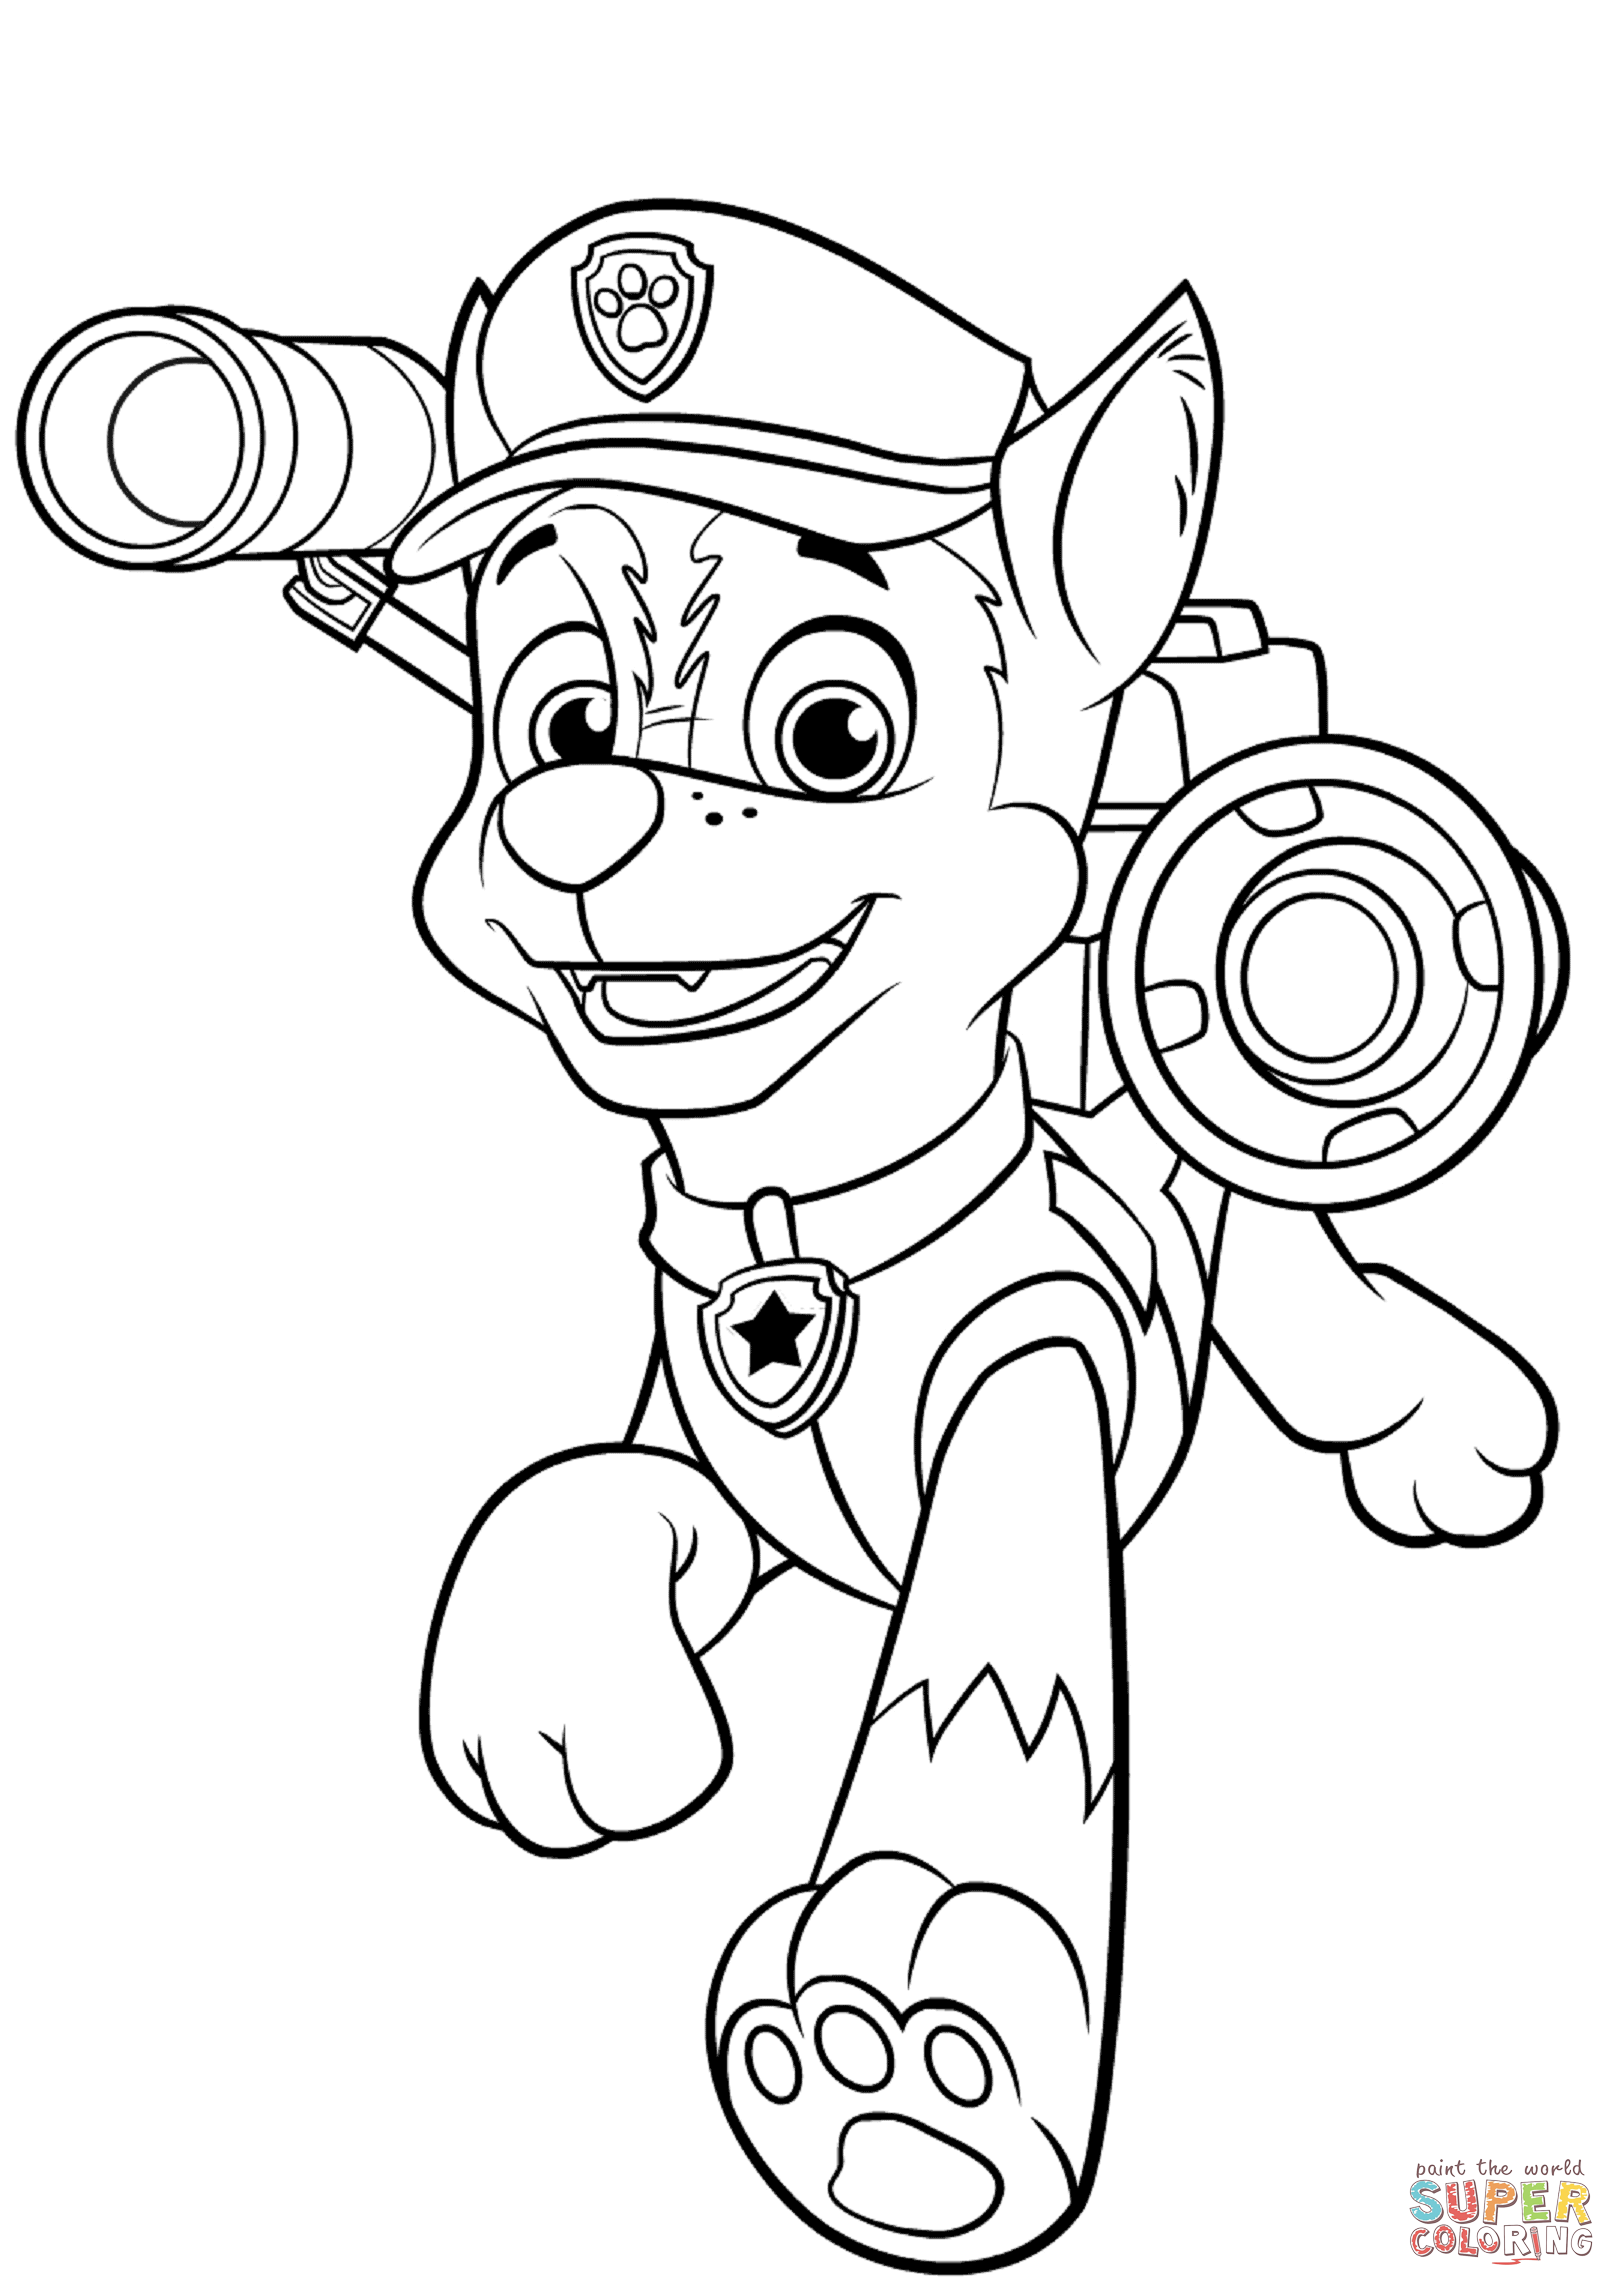 Chase with Police Pup-Pack coloring page | Free Printable Coloring Pages